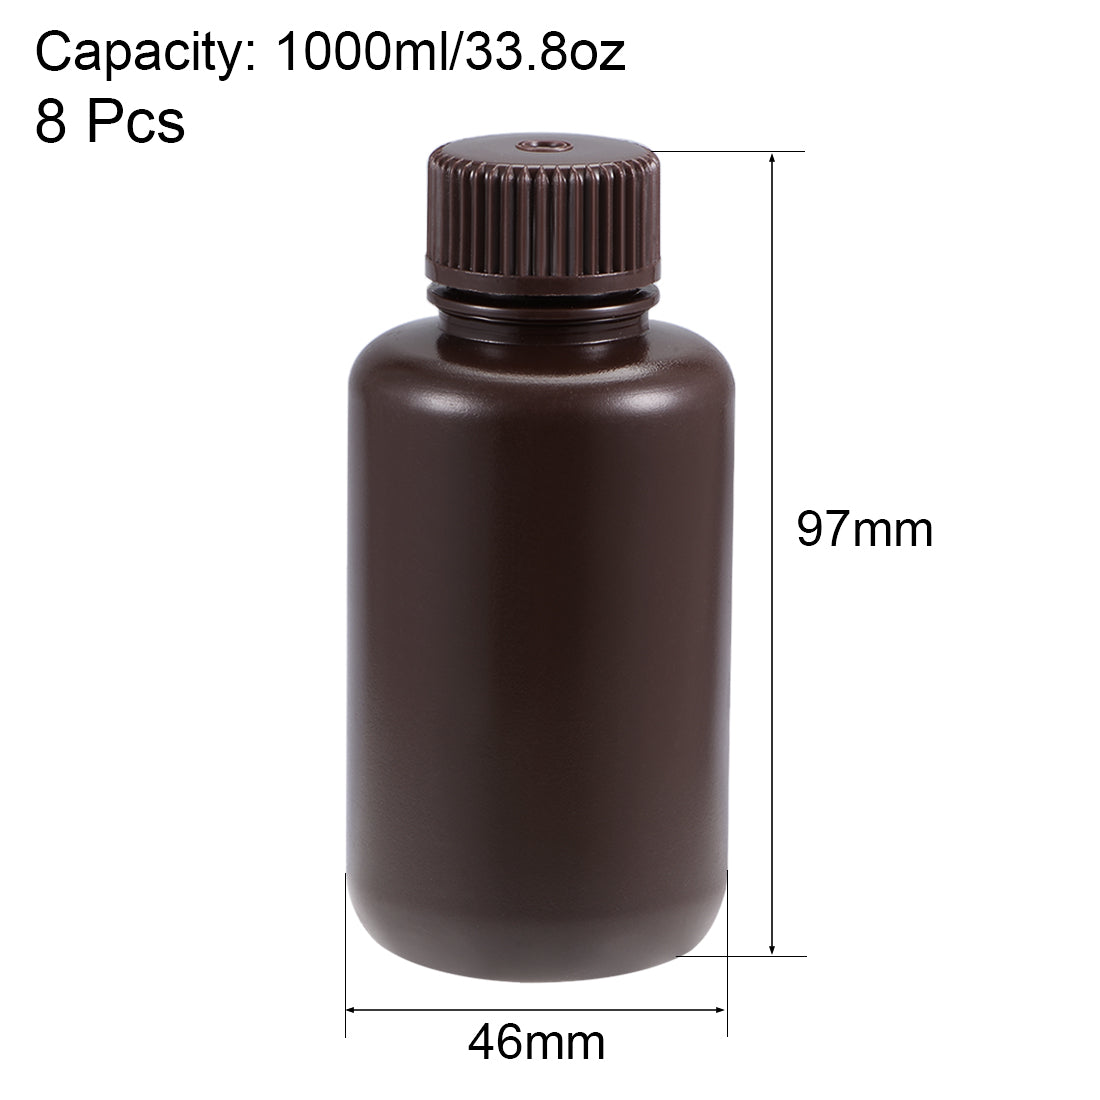 uxcell Uxcell Plastic Lab Chemical Reagent Bottle 100ml/3.4oz Small Mouth Sample Sealing Liquid Storage Container Brown 8pcs